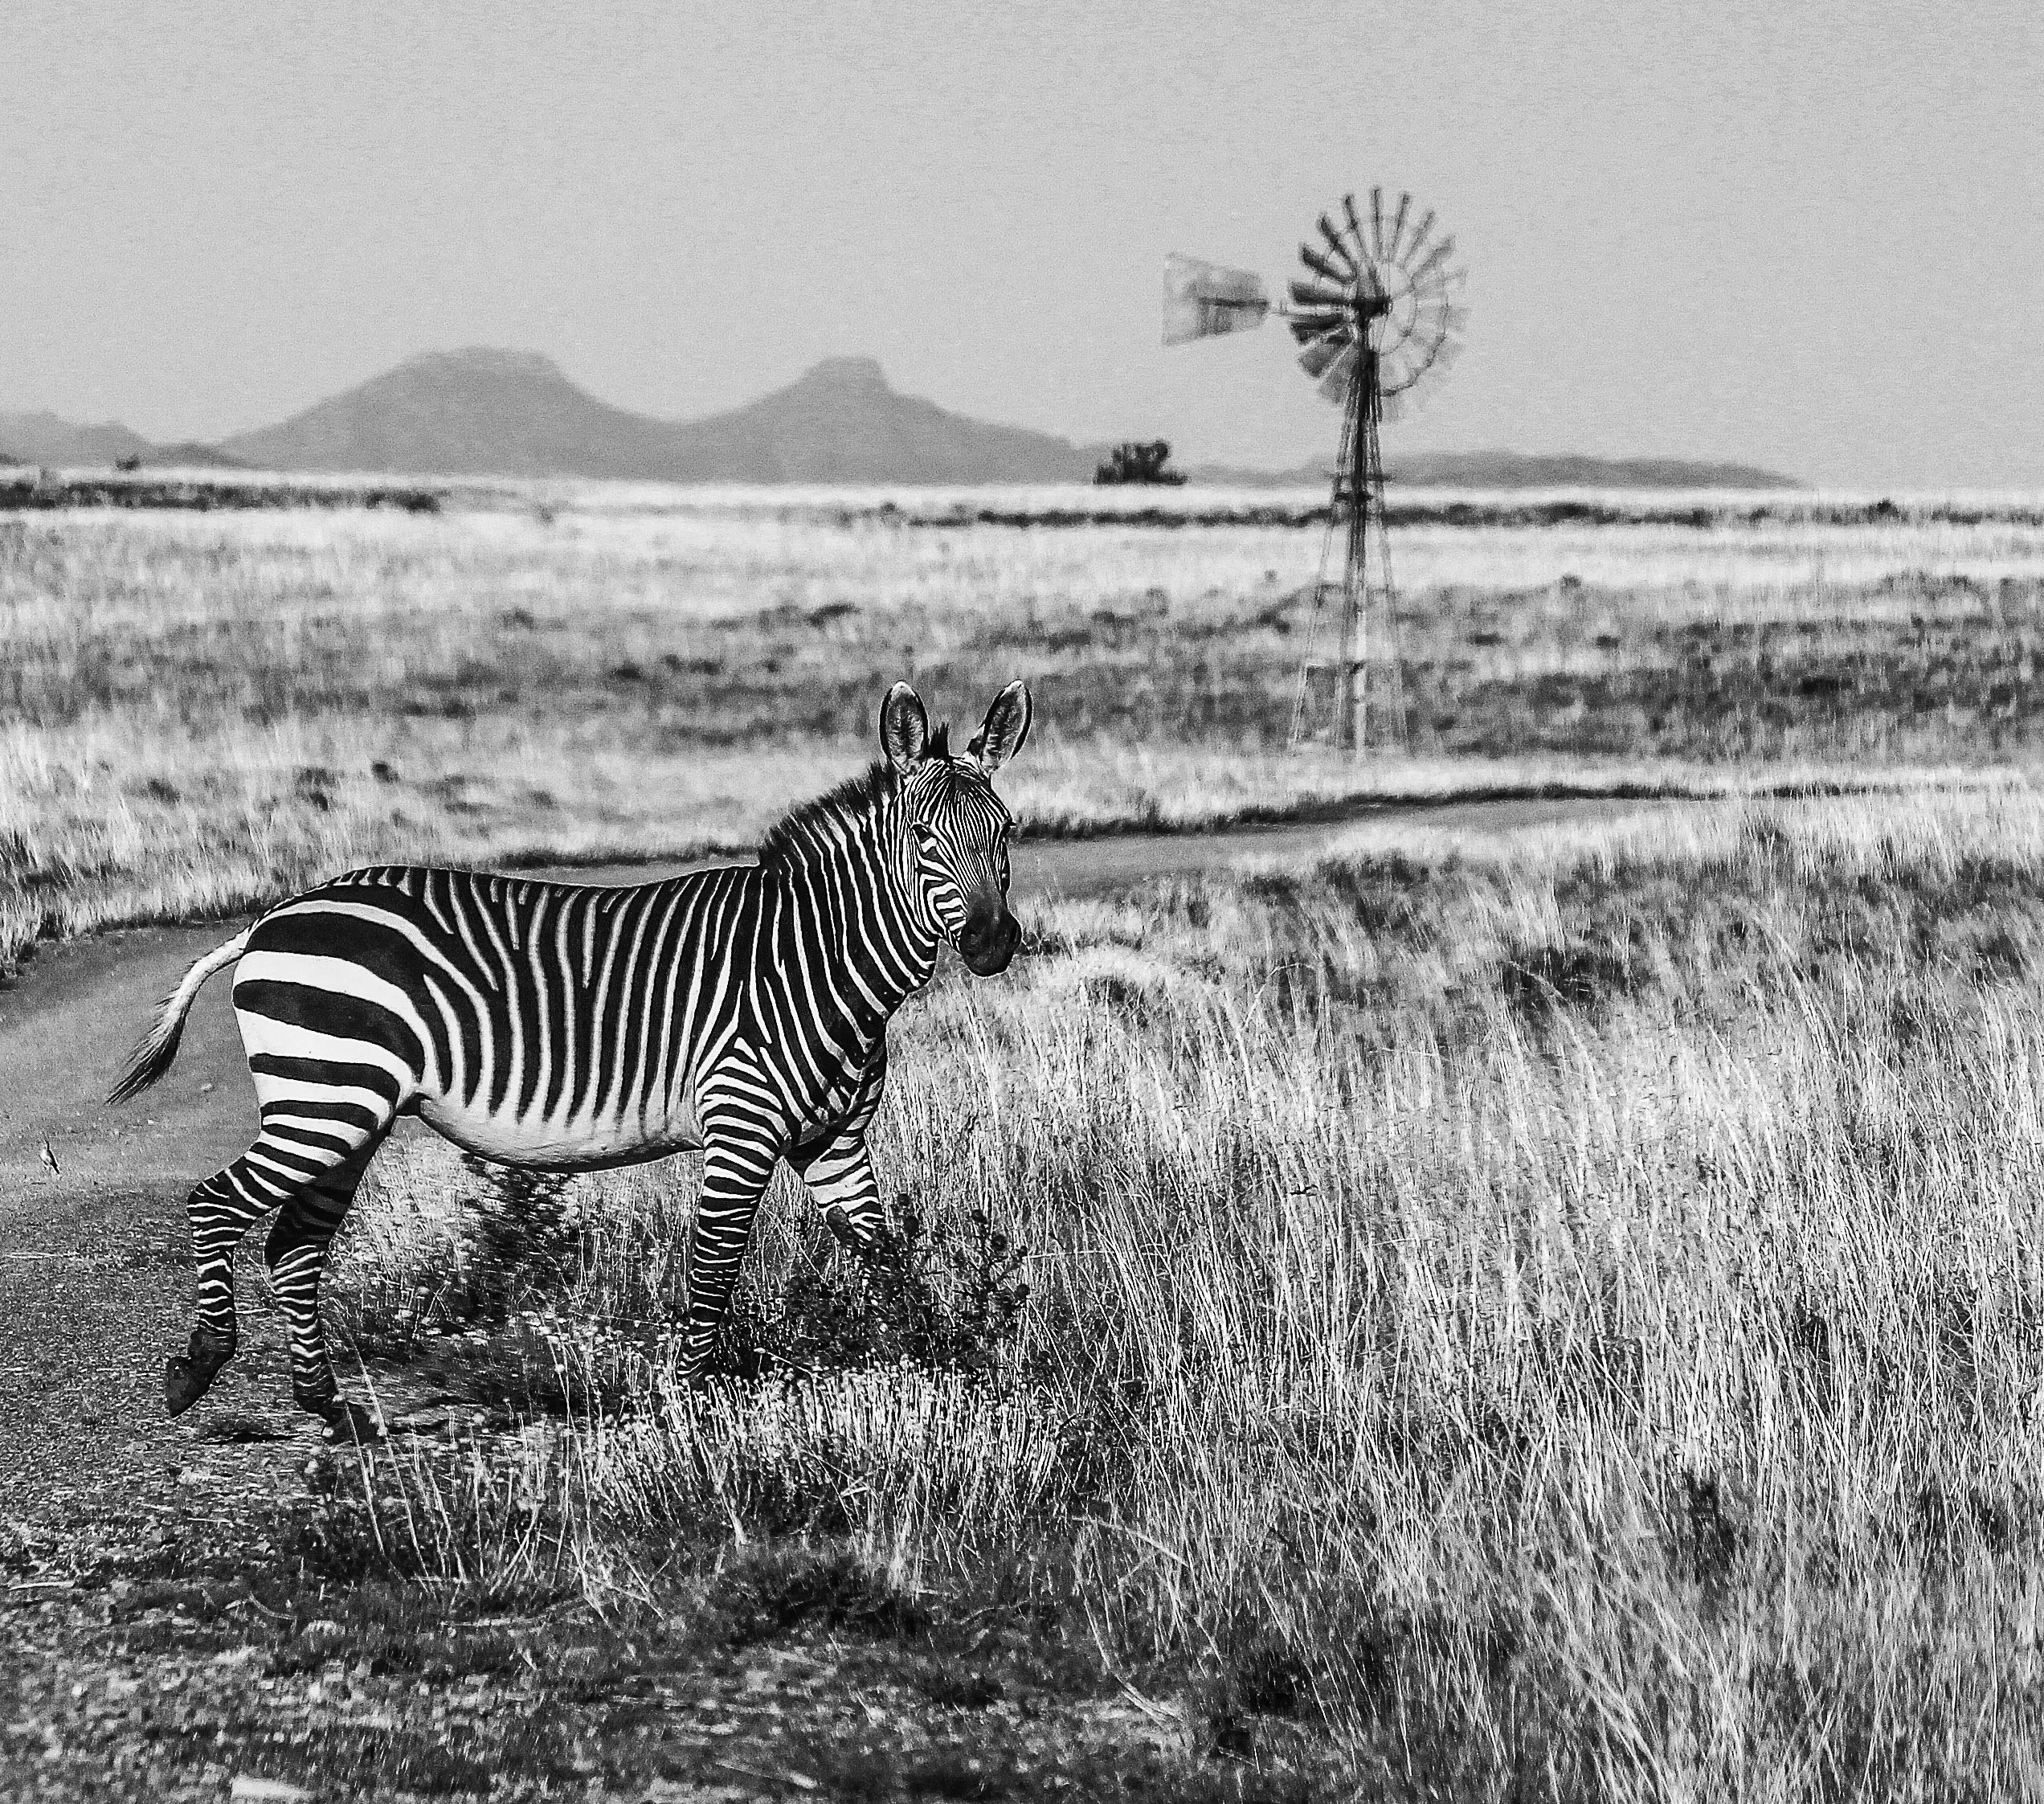 The Mountain Zebra – one of the icons of Cradock. Photograph by Chris Marais.